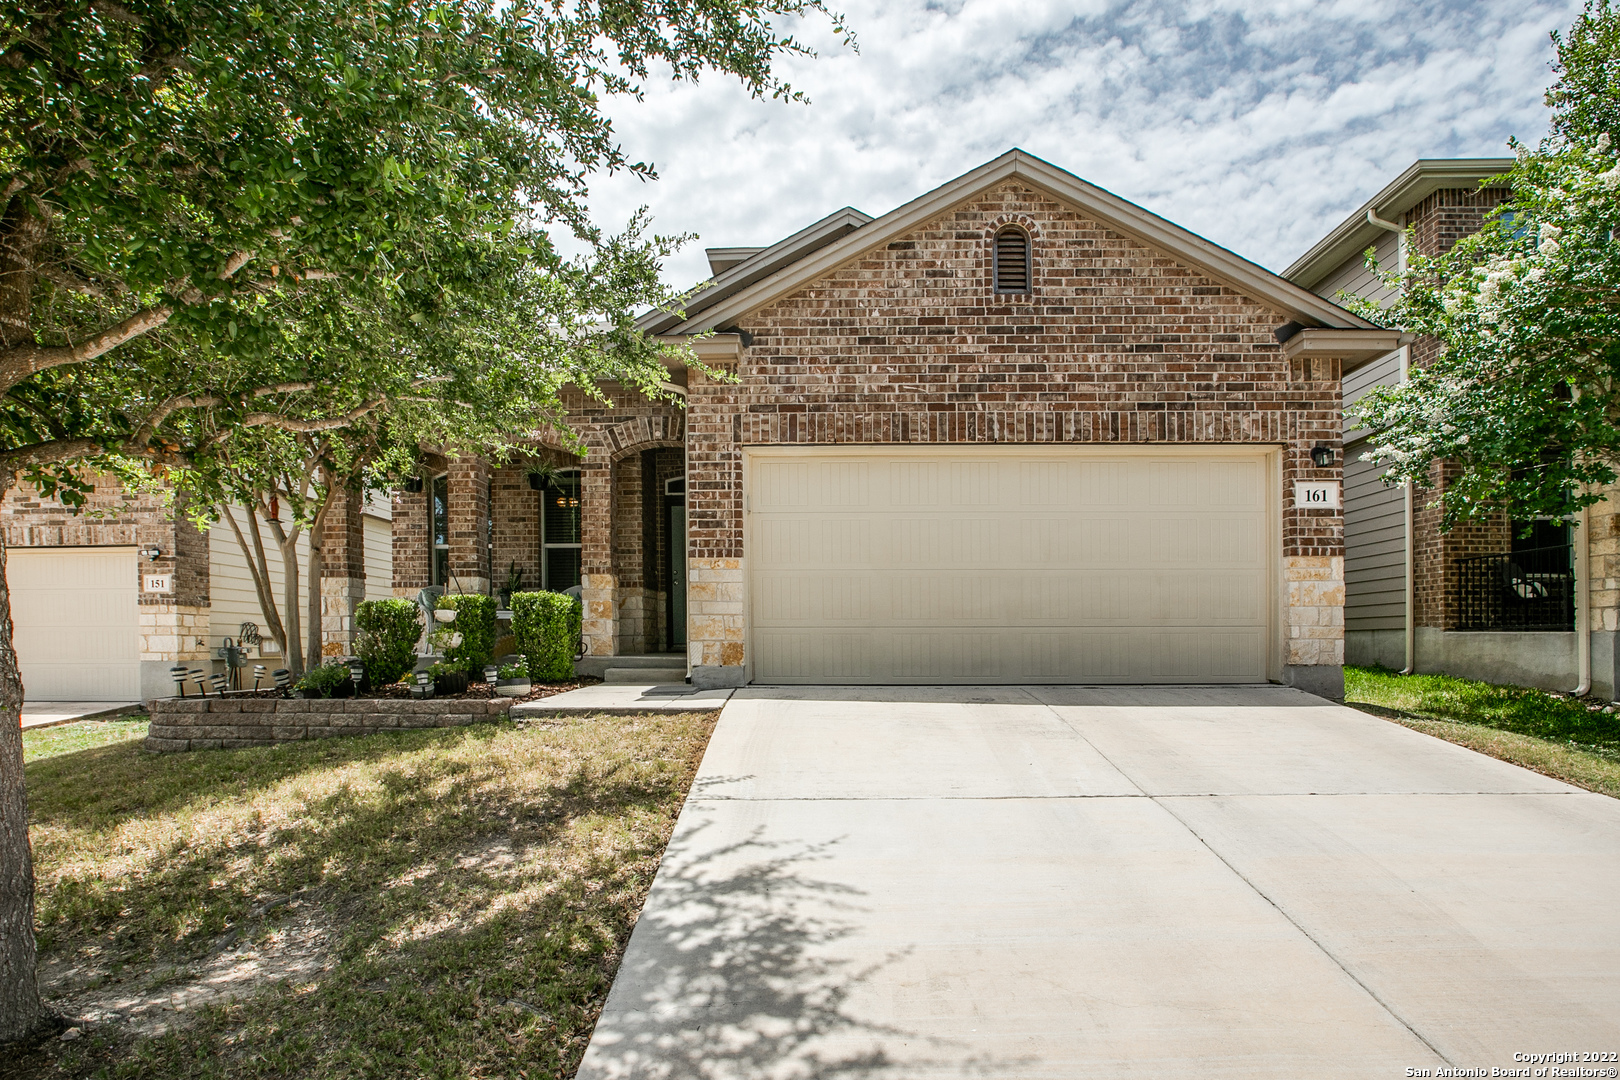 Open house Sunday 6/26 2-5PM. Step inside this gorgeous 4 bed 3.5 bath home located in Redbird Ranch in the desirable Medina Valley ISD. Inside you'll find plenty of room for everyone: A well-lit office sits next to the dining room at the bottom of the stairs. The kitchen comes equipped with tons of counter and cabinet space along with a functional island, stainless steel appliances, a roomy pantry, and an attached dining area. The living room sits at the back of the house, open to the kitchen. The master bedroom features his/hers closets, a separate tub and shower, and double vanity. Upstairs is ready for all your entertaining and playing with a huge loft area and media room both central to the 3 secondary bedrooms. One bedroom has it's own full bathroom attached. Refrigerator conveys.